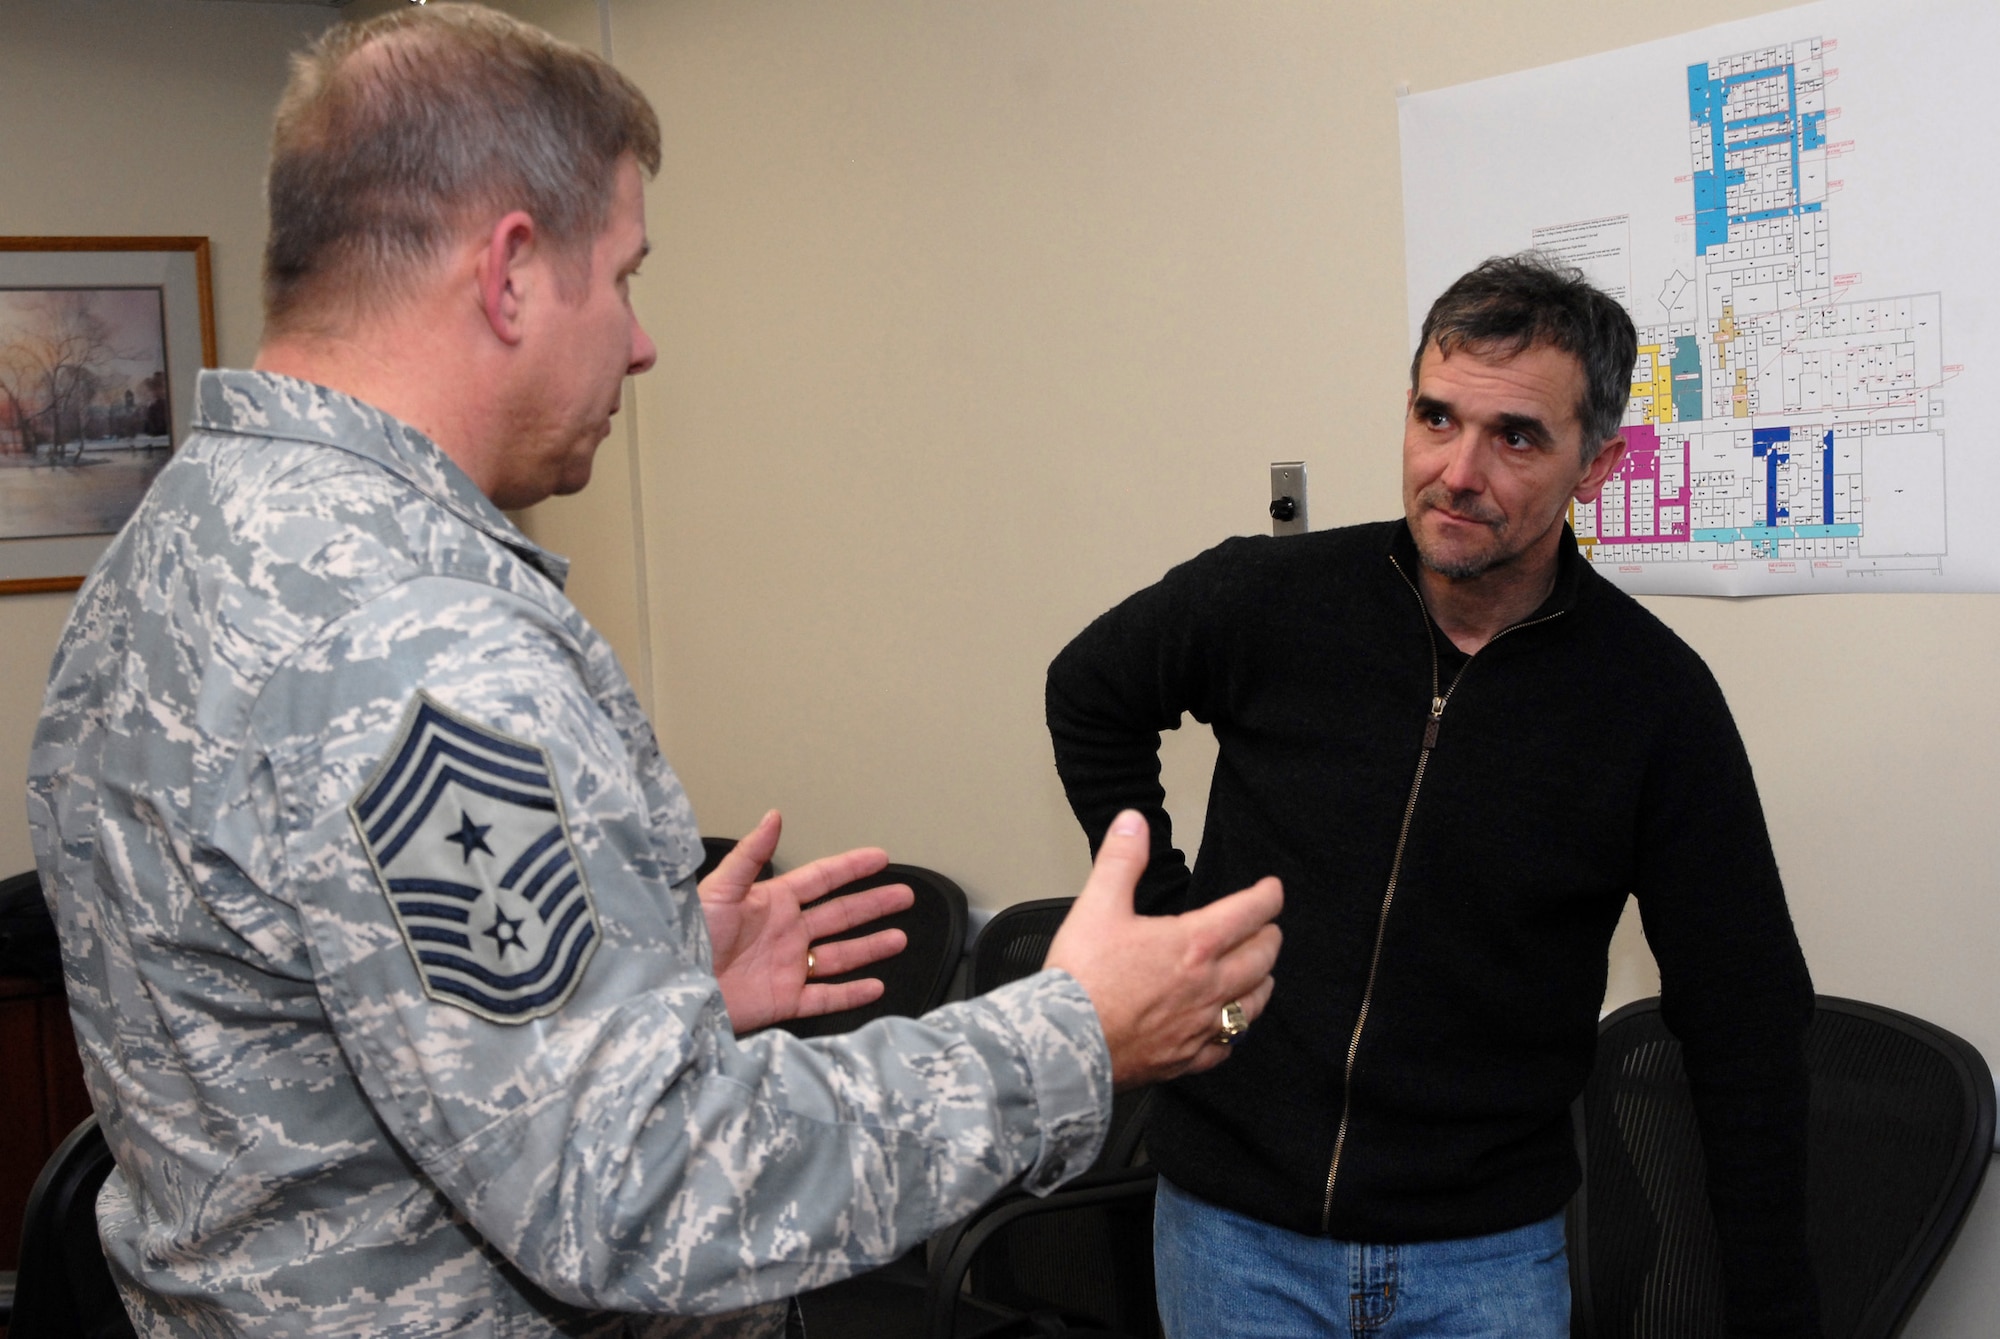 Chief Master Sgt. Steve Sargent, 341st Space Wing command chief, speaks with John Underwood, president and founder of the American Athletic Institute, following a presentation he gave on the negative physiological effects of alcohol on athletes and Airmen whose motto is “Fit to Fight” April 1. (U.S. Air Force photo/John Turner)